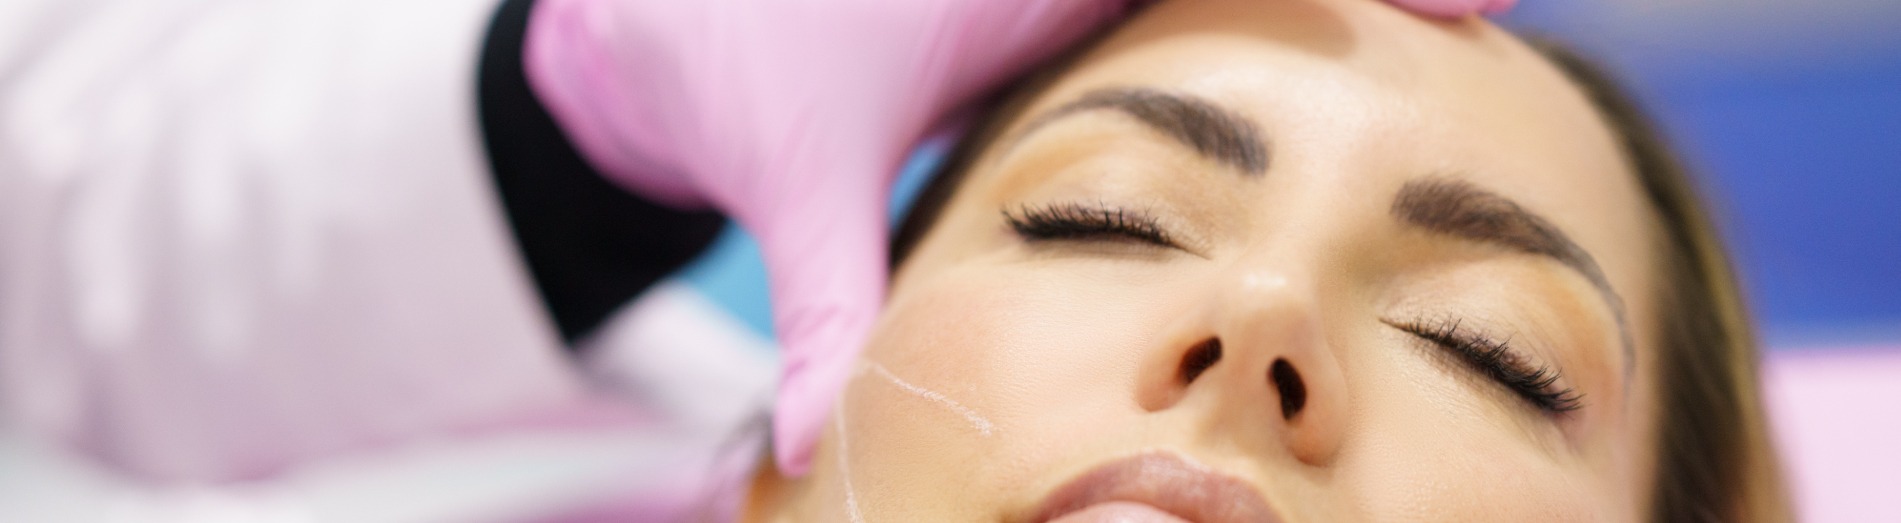 Dew Aesthetics, Chester | Threadlifts, Microdermabrasion, Skincare | Woman having thread lifts